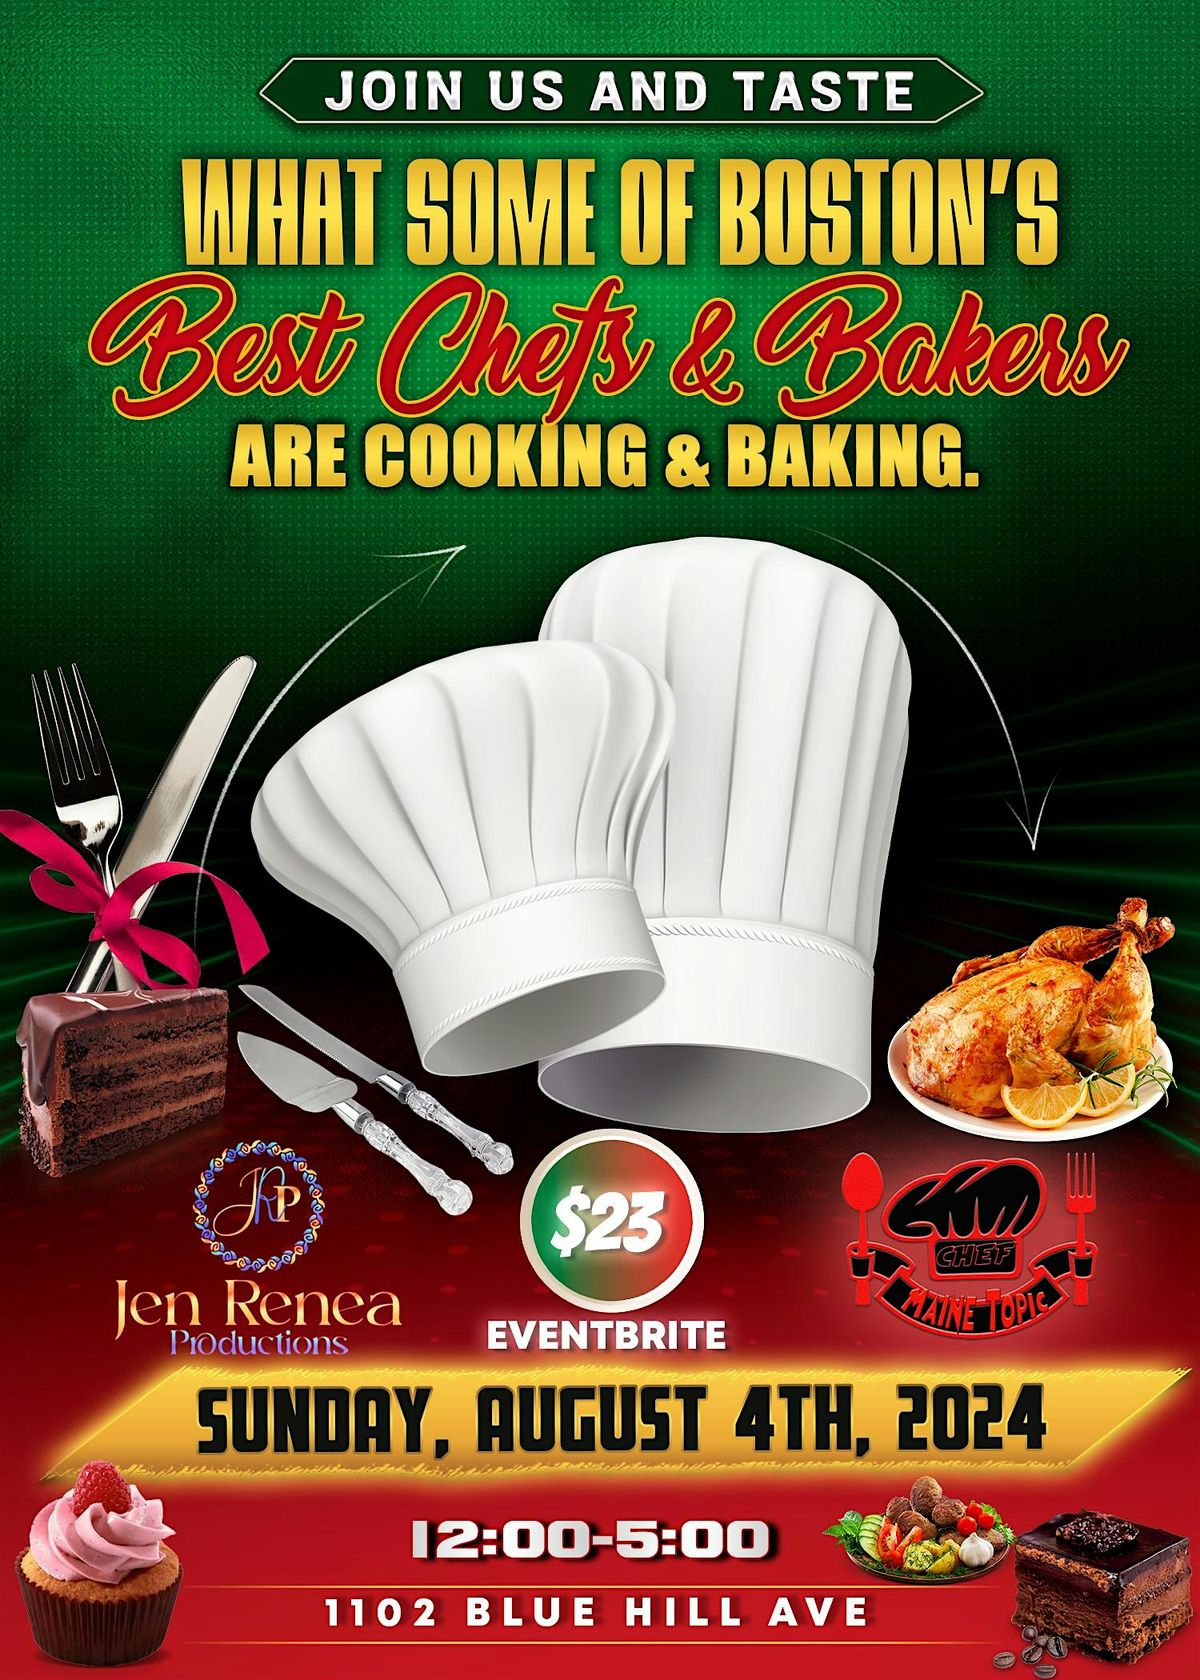 Some of Boston's Best Chefs & Bakers Cook-off